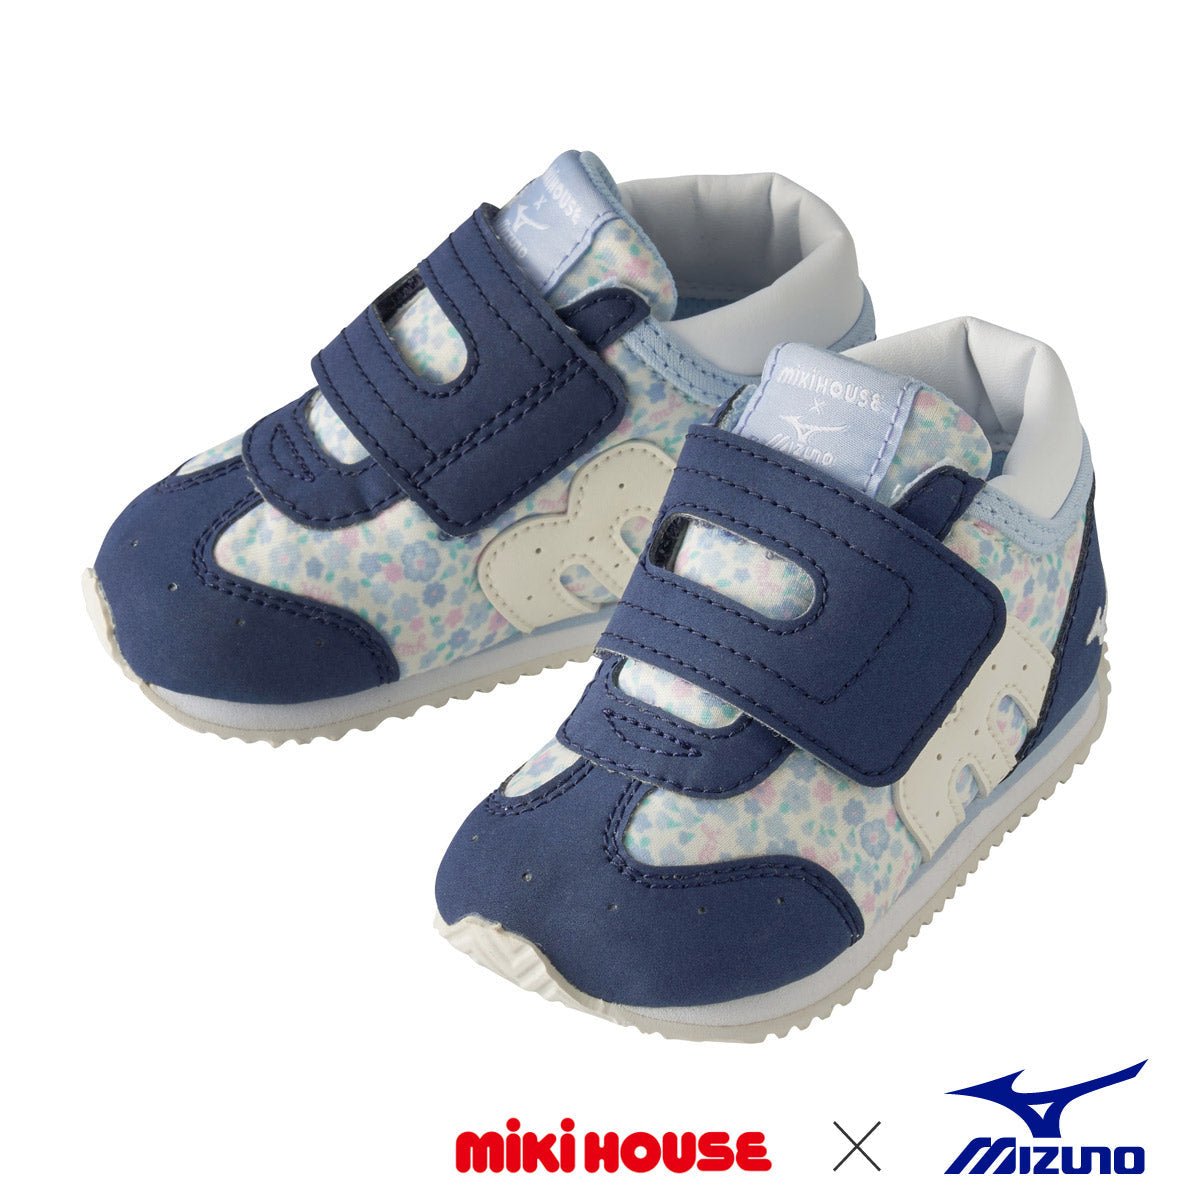 MIKI HOUSE & Mizuno Second Shoes -Floral